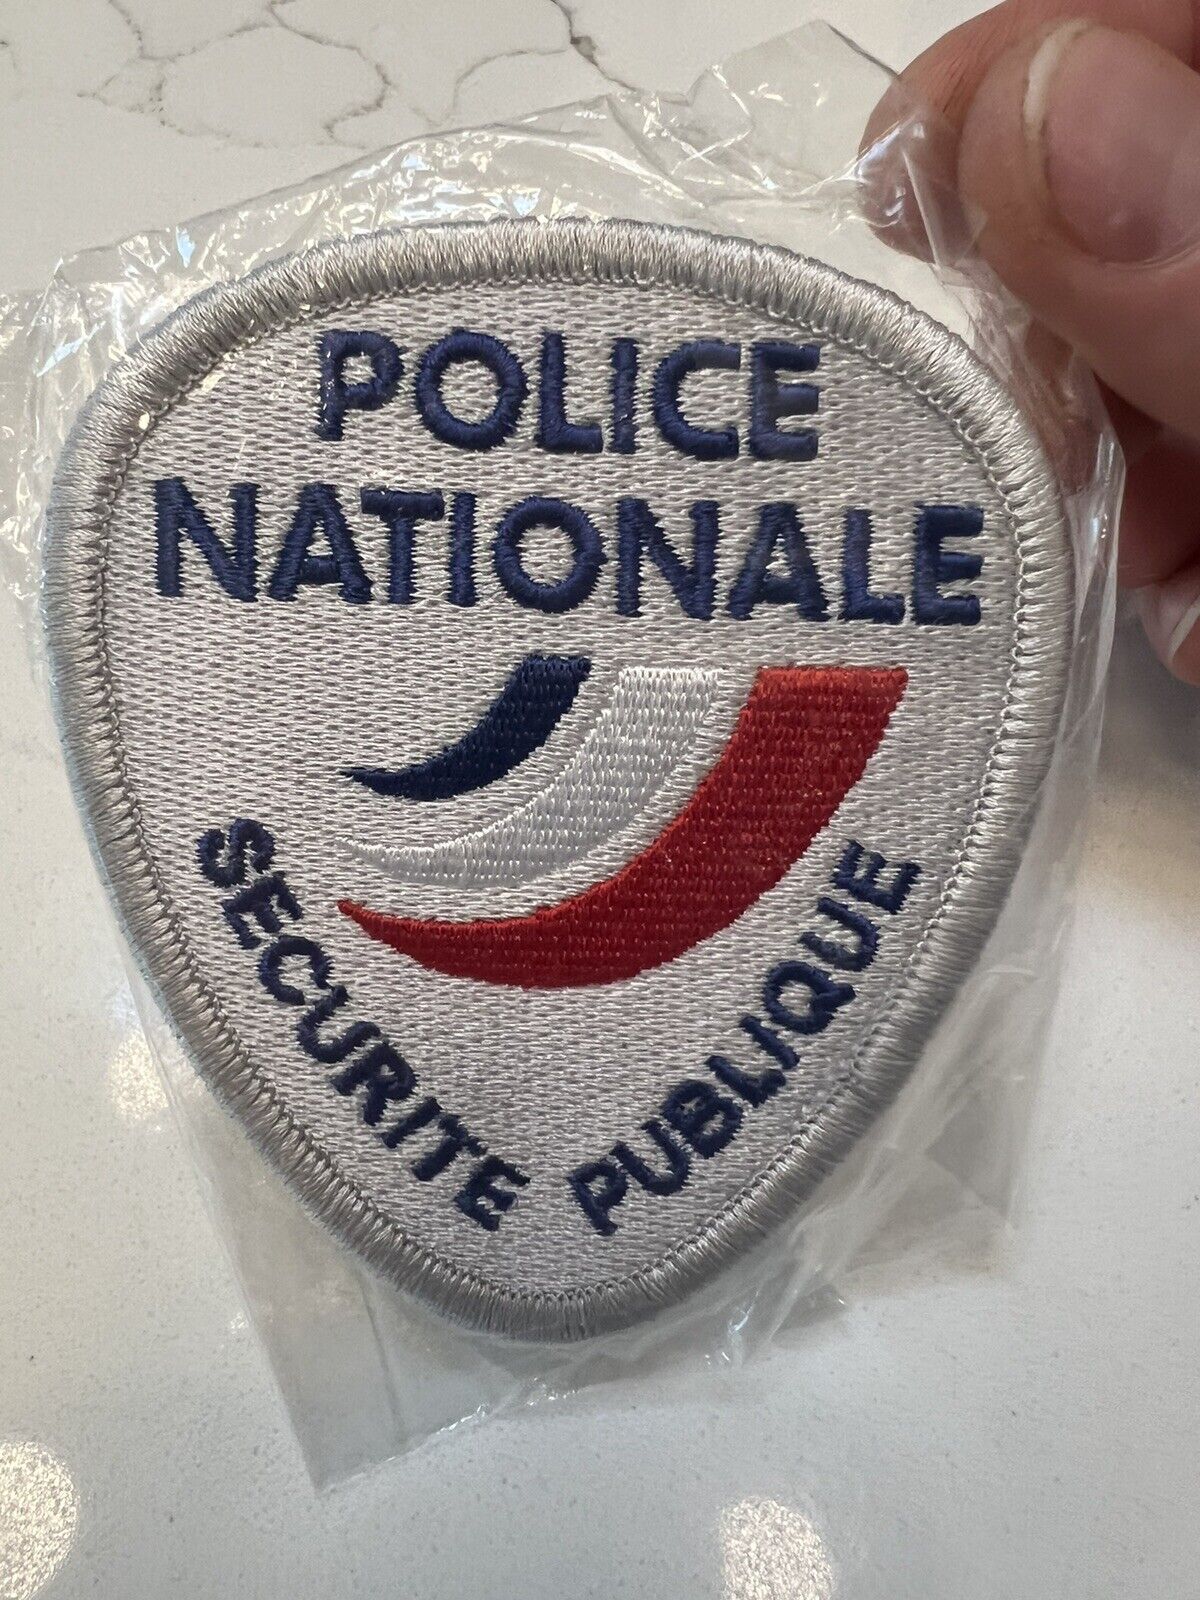 Police Nationale Securite Publique French Police Patch - New In Plastic